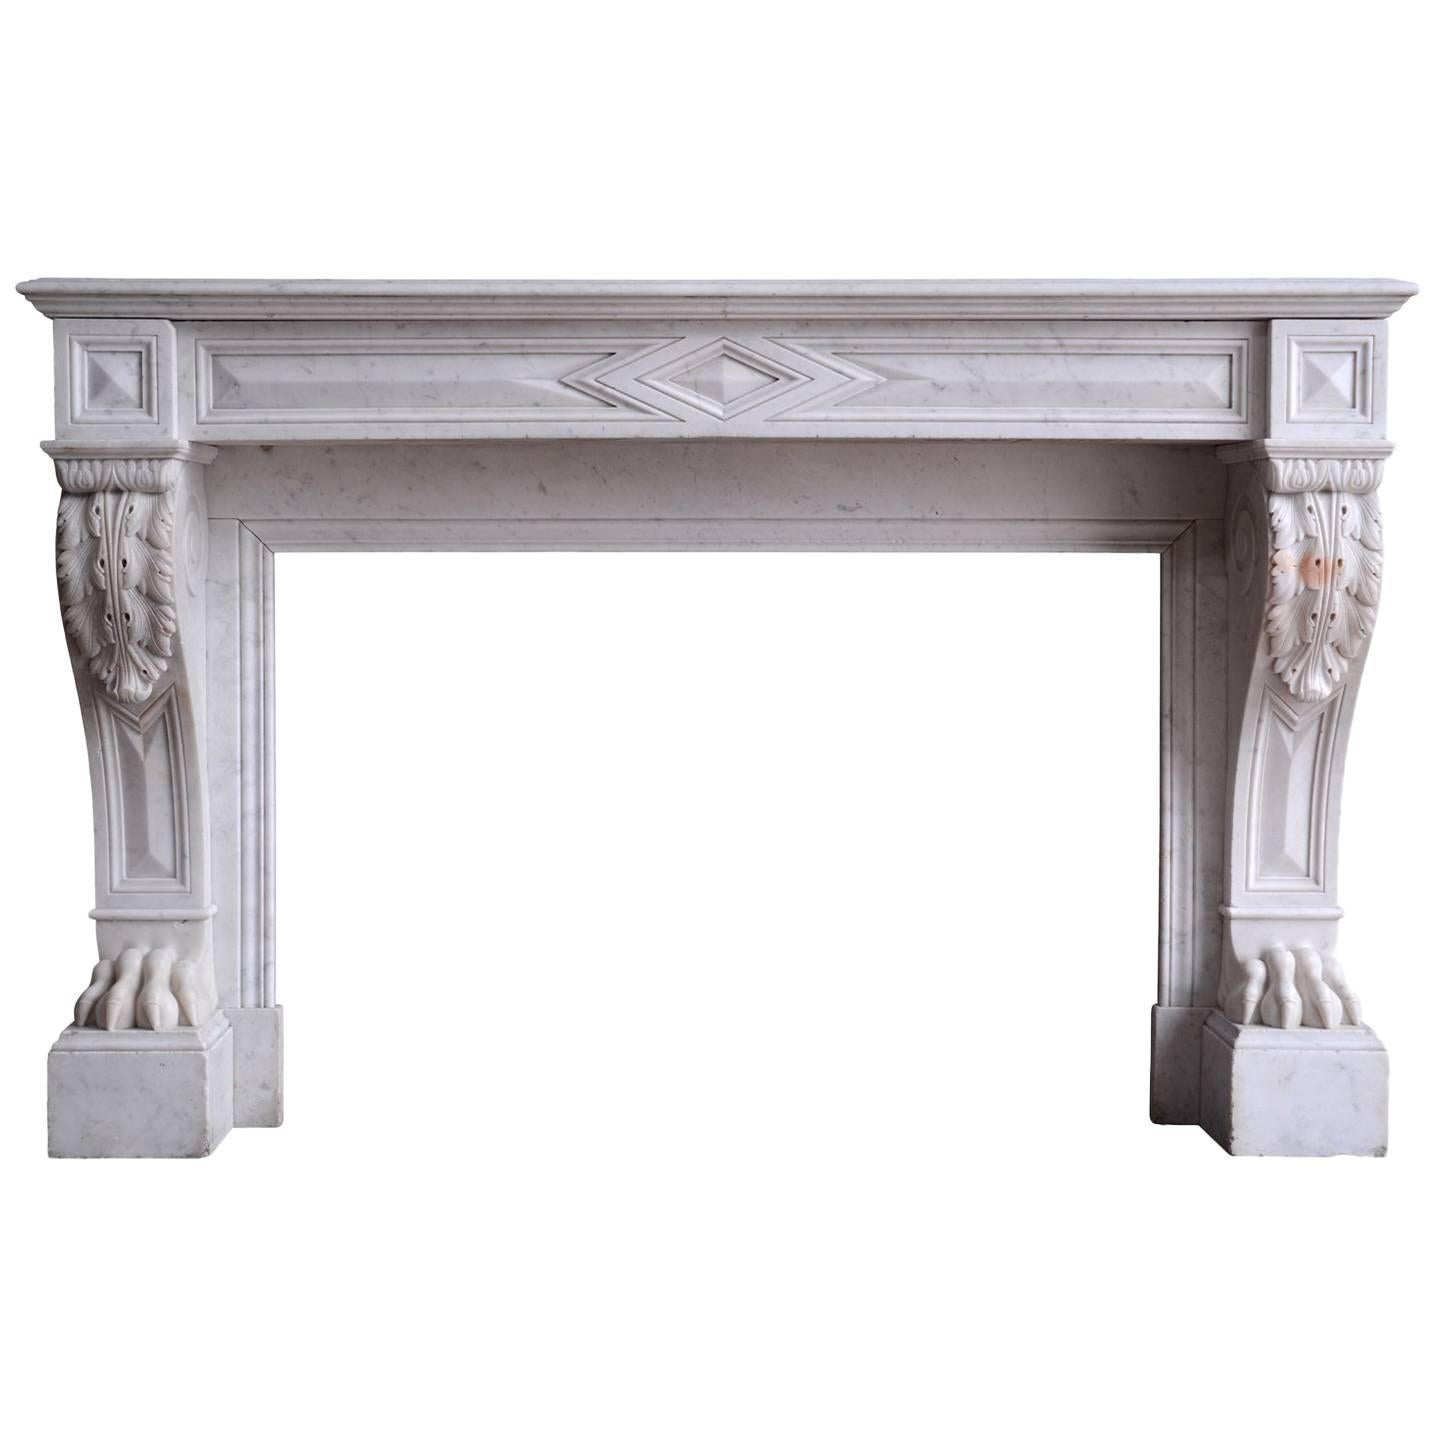 French Louis-Philippe White Carrara Marble Fireplace, 19th Century For Sale